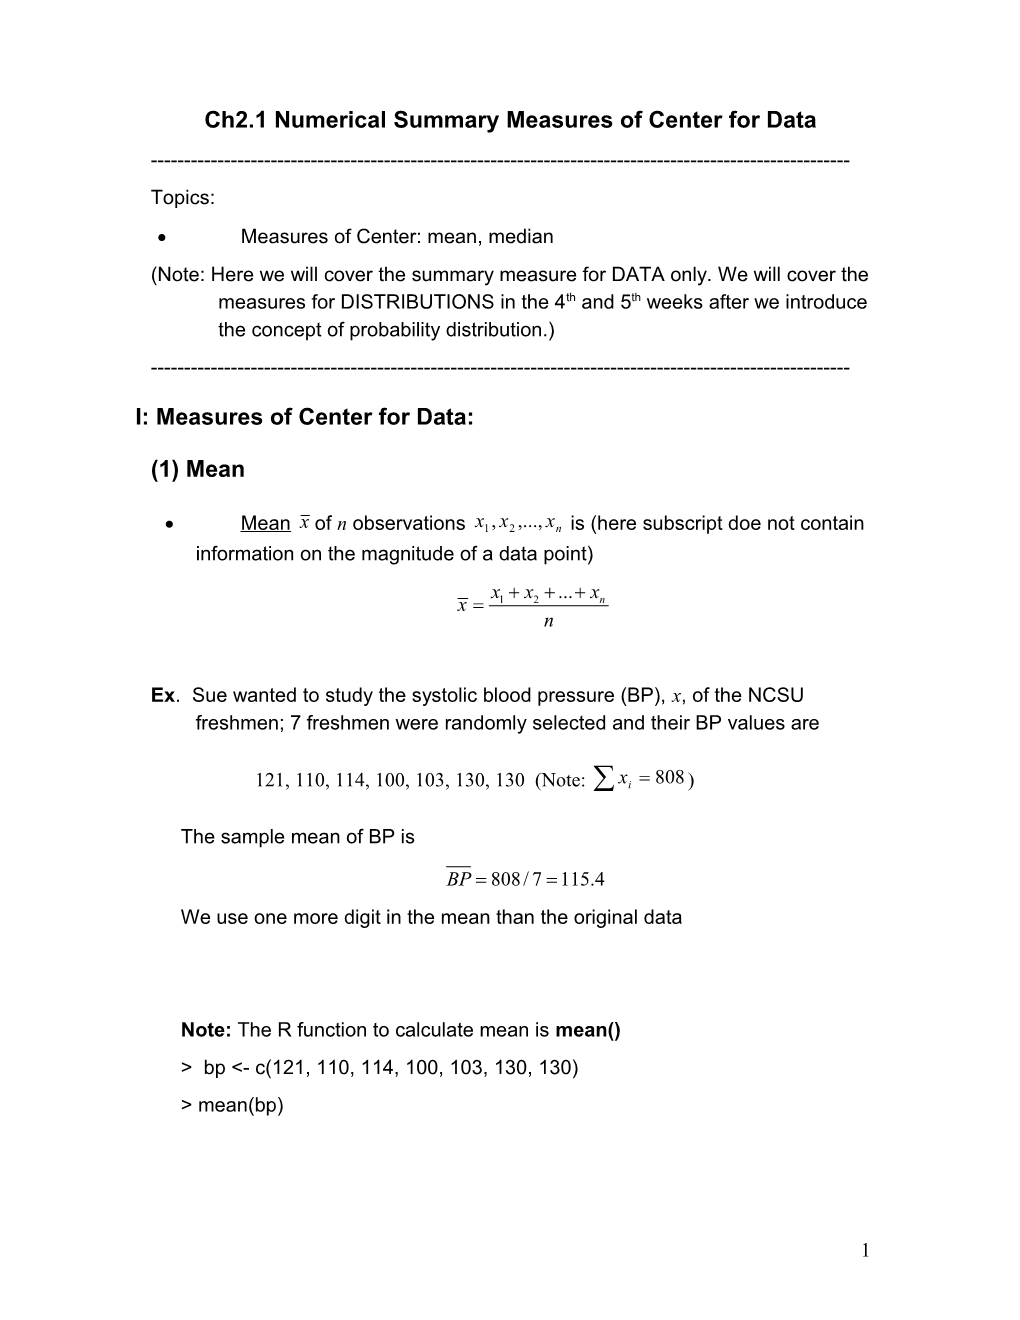 Ch2.1Numerical Summary Measures of Center for Data